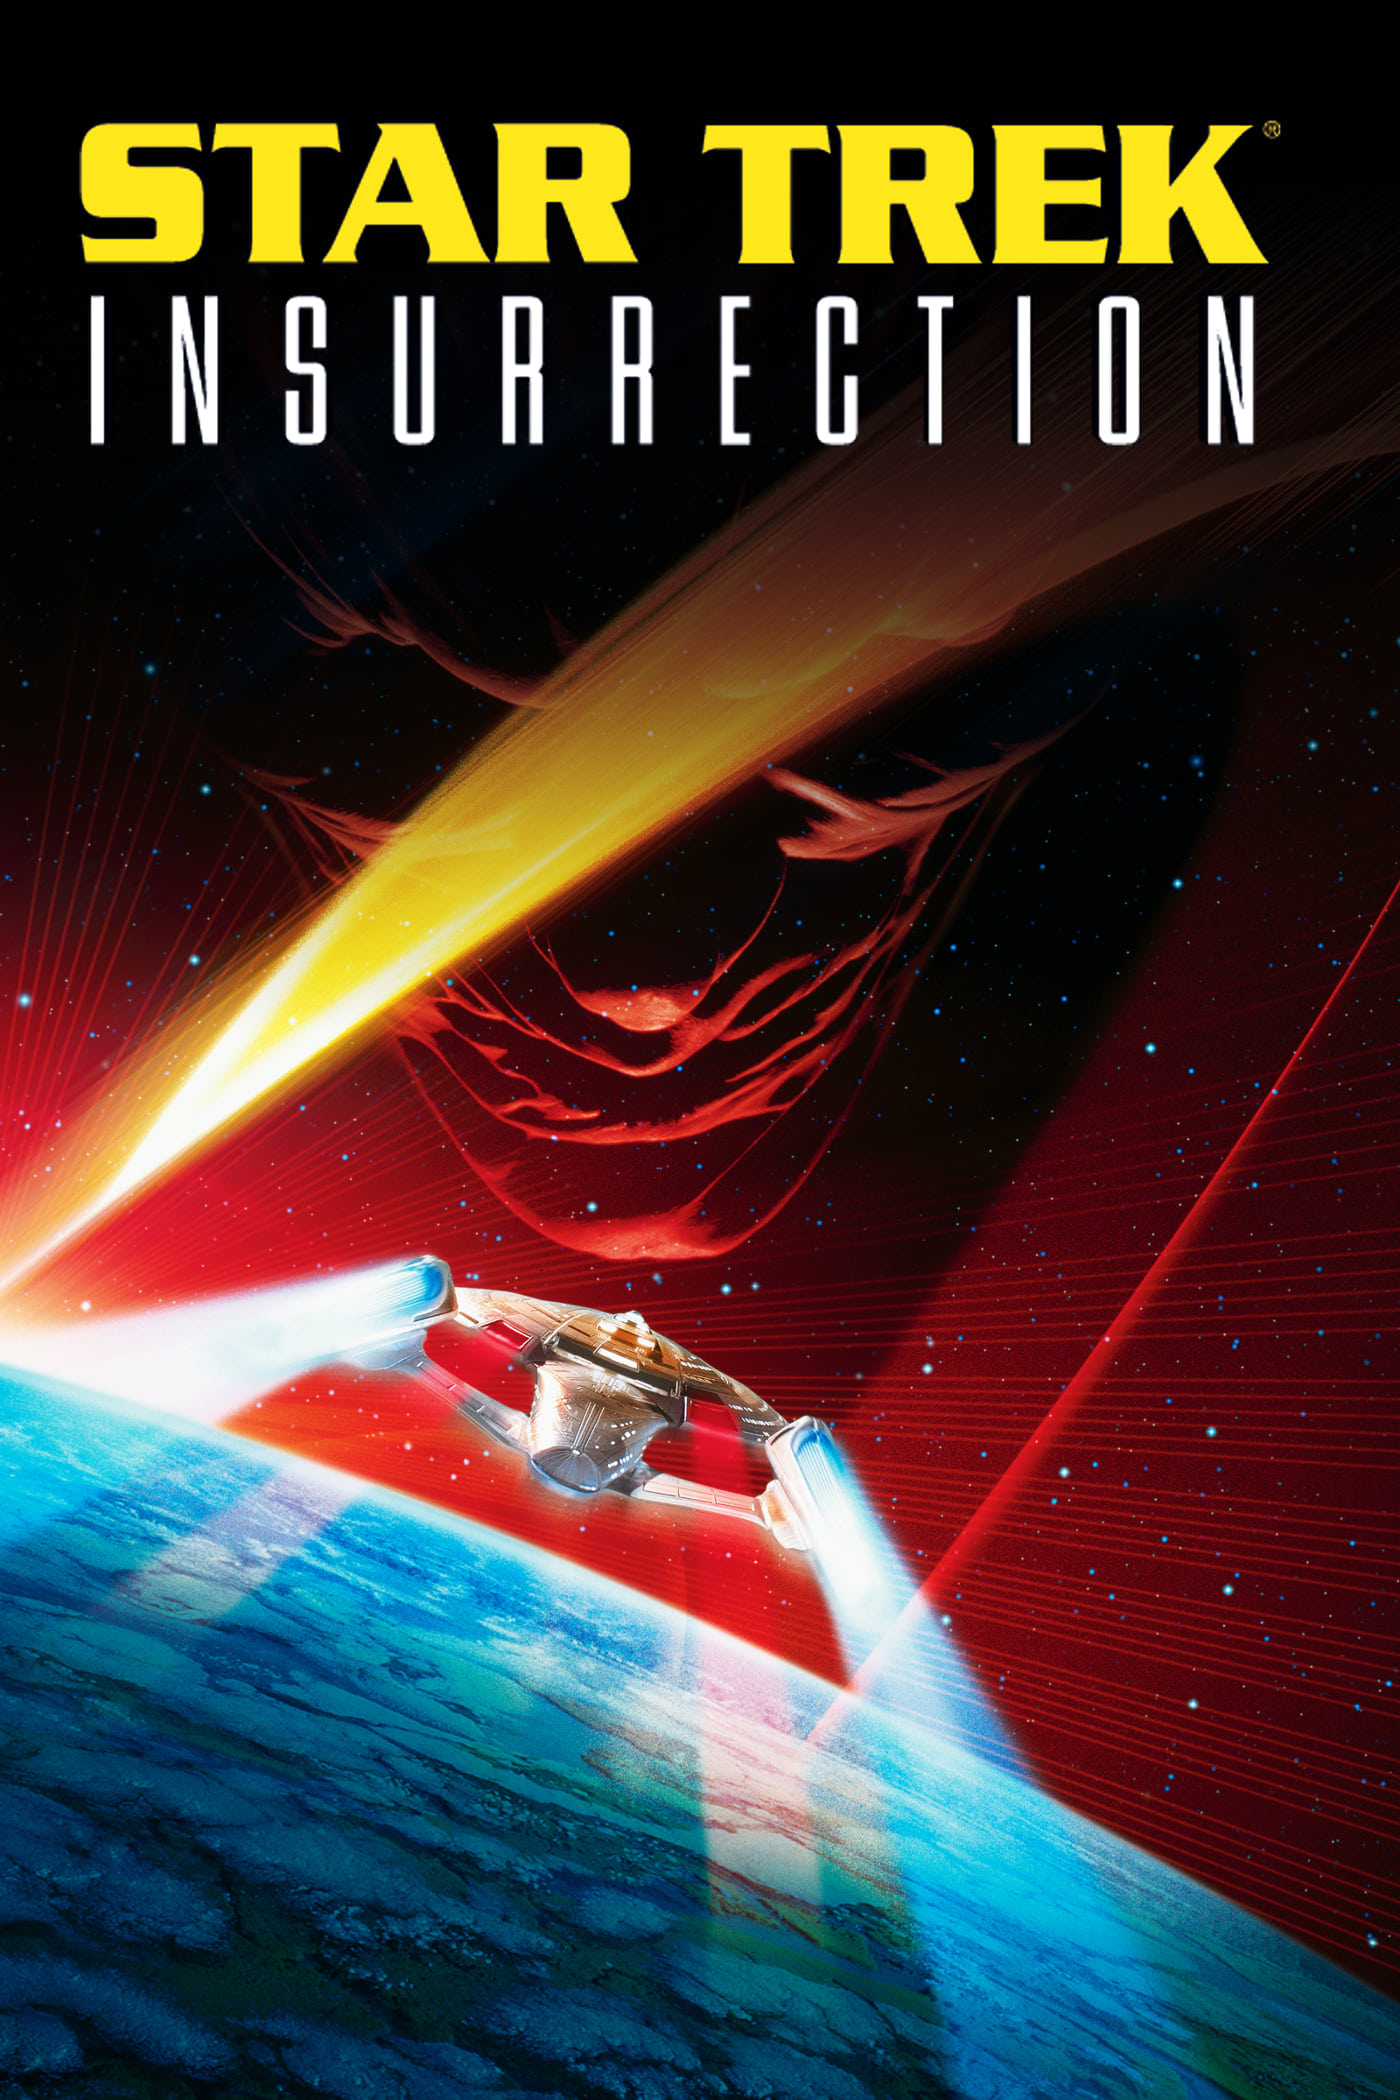 what year does star trek insurrection take place